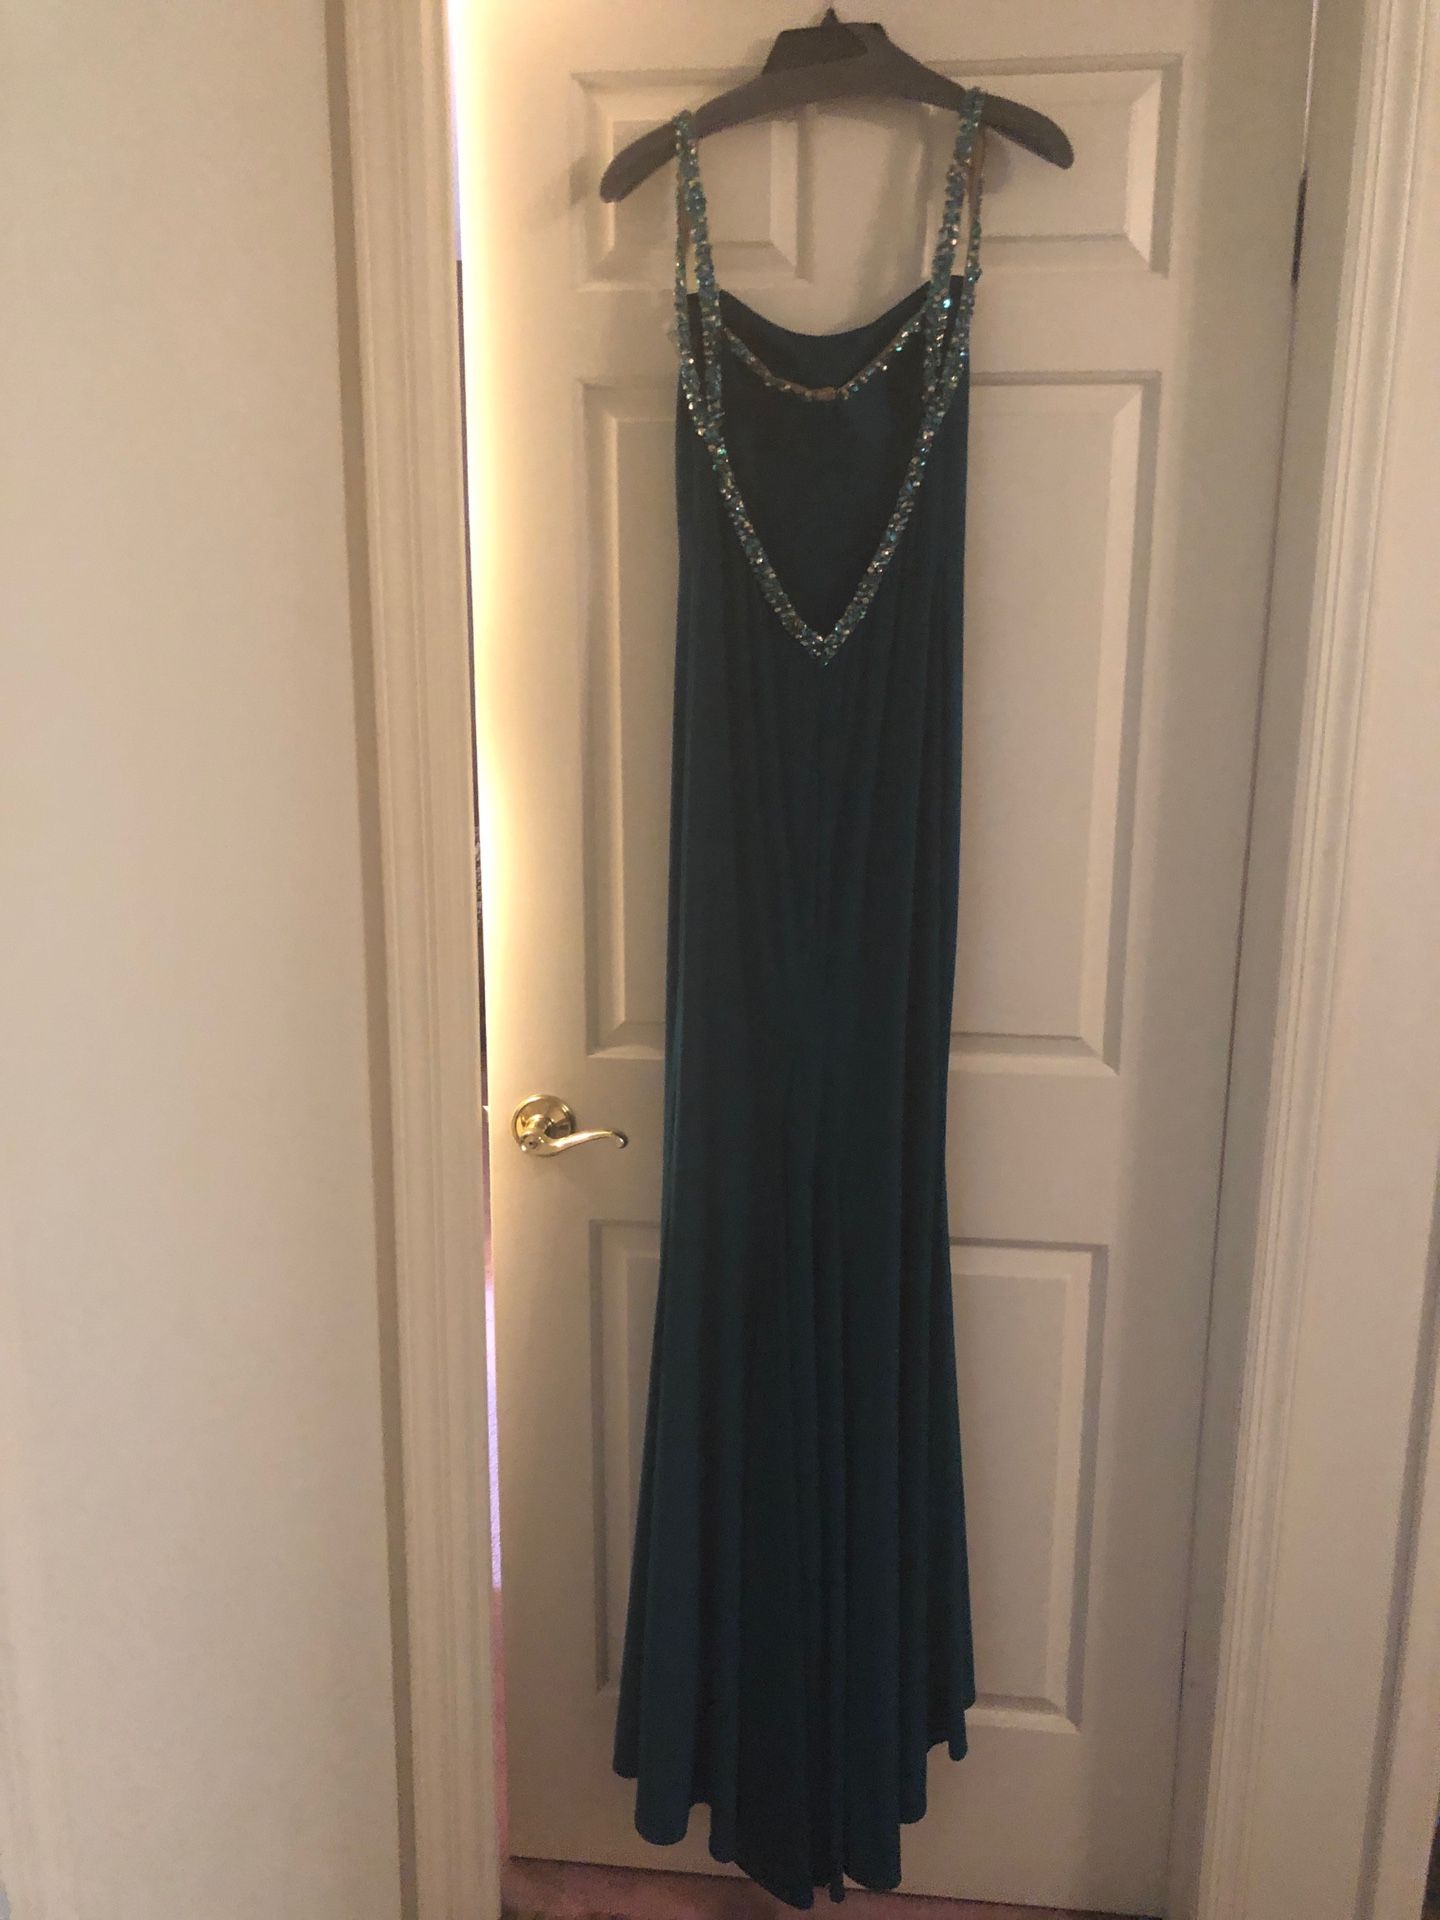 Brand New Faviana Evening gown. Size 4.